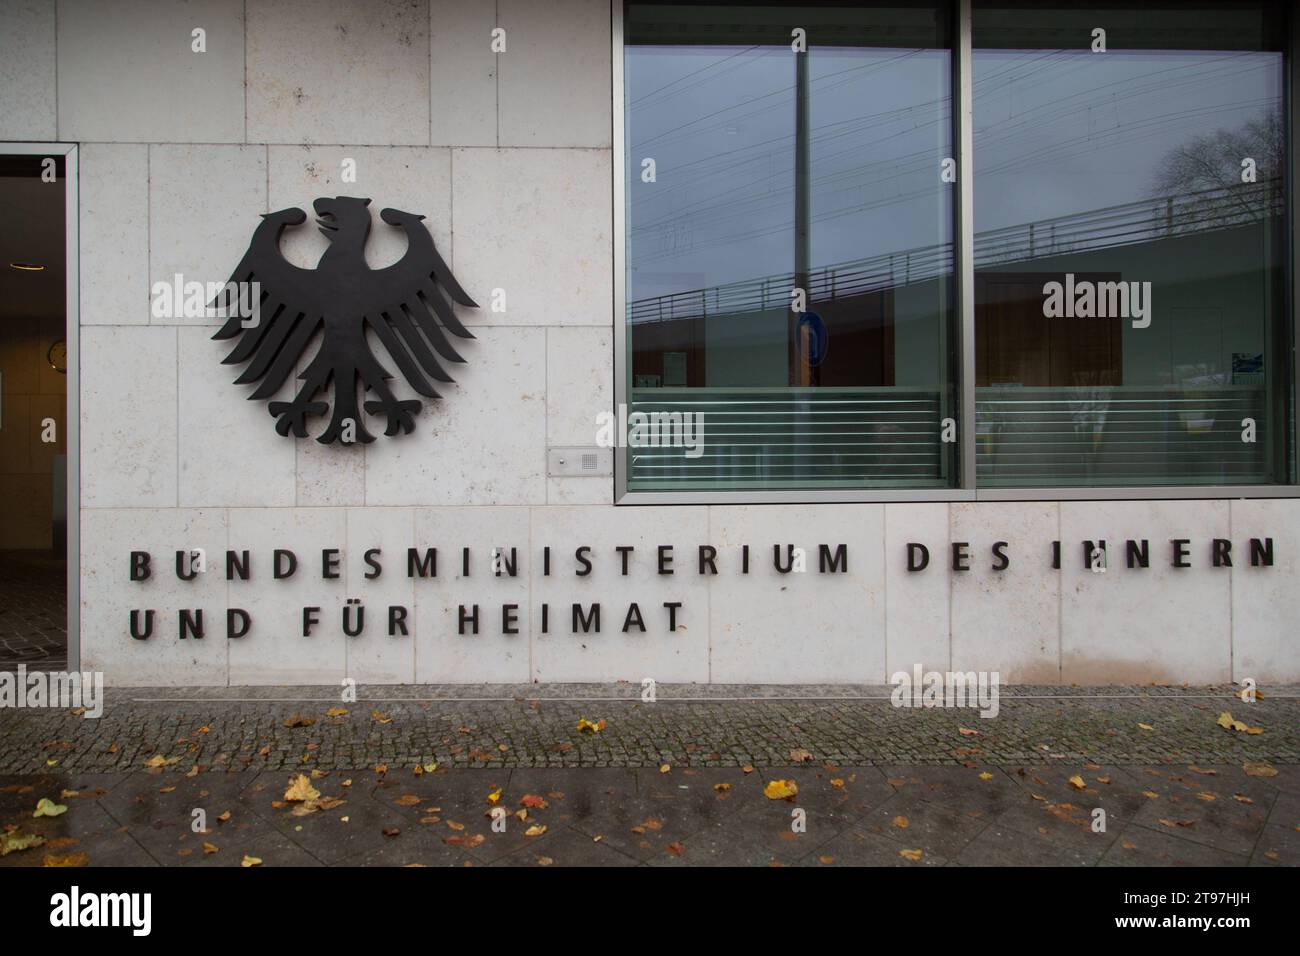 Bundesministerium des Innern und für Heimat in Berlin am 23.11.2023 *** Federal Ministry of the Interior and for Home Affairs in Berlin on 23 11 2023 Credit: Imago/Alamy Live News Stock Photo